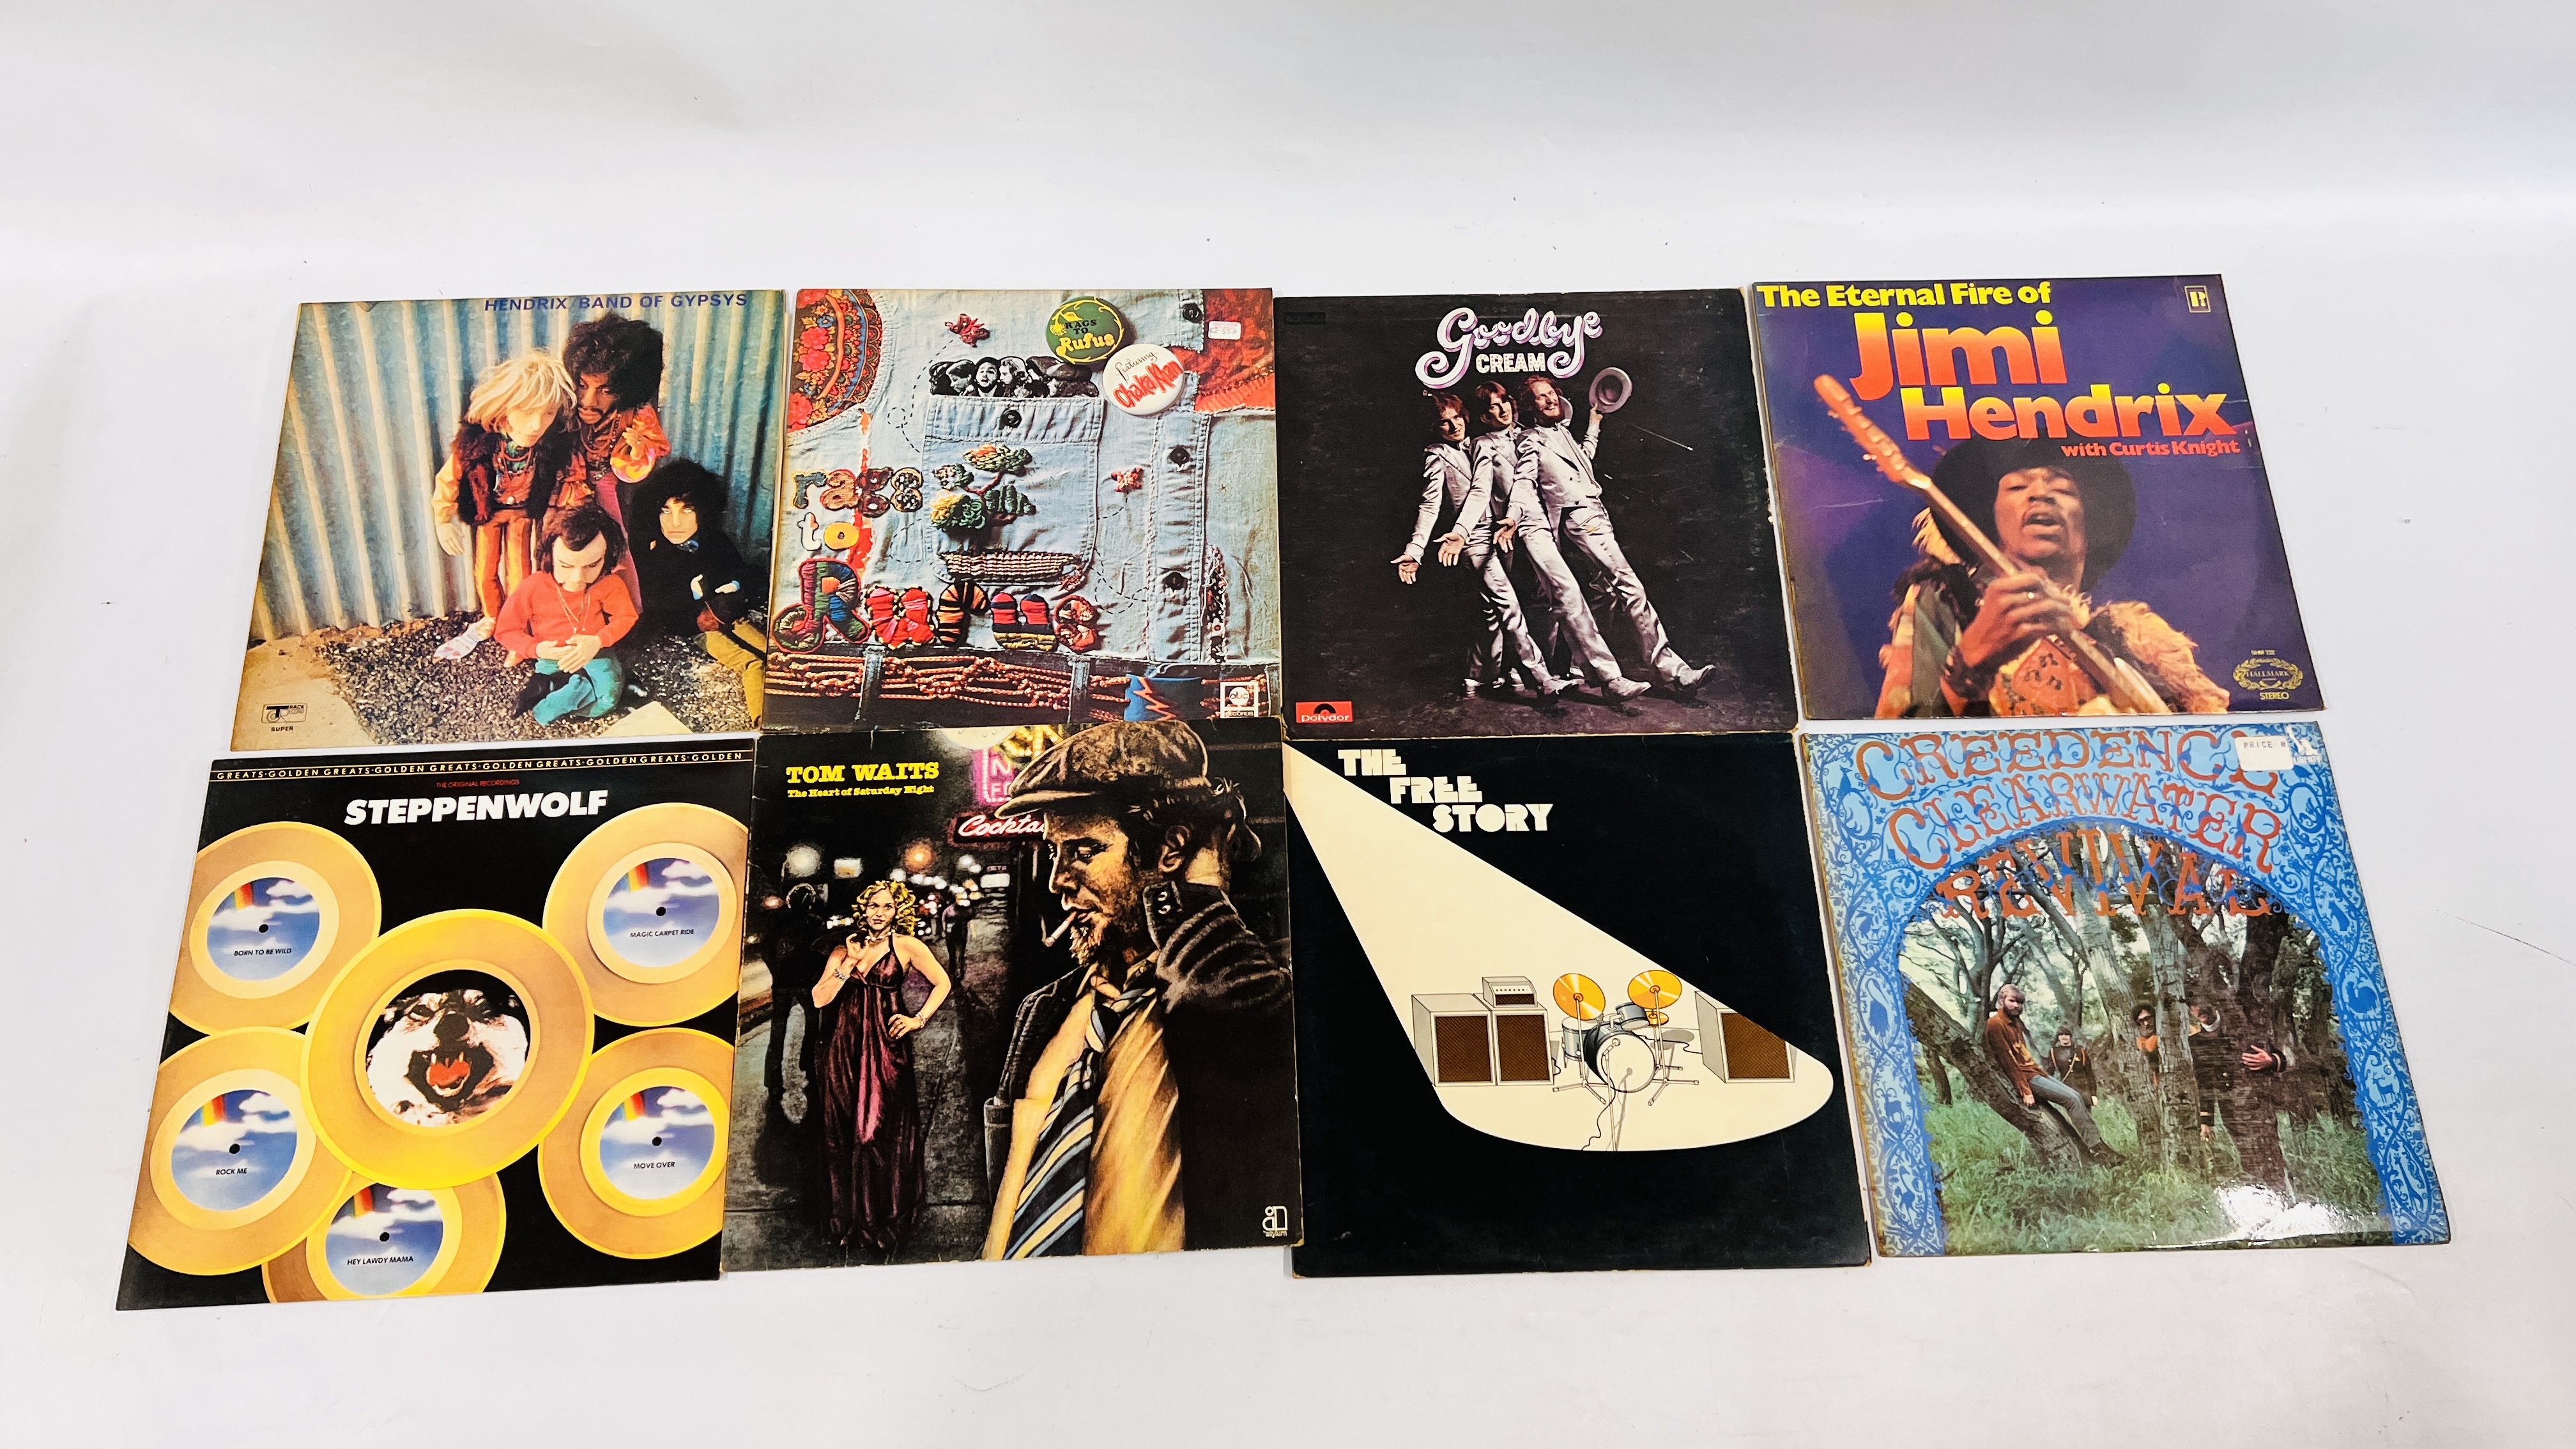 2 BOXES CONTAINING AN EXTENSIVE COLLECTION OF MAINLY 70'S AND 80'S ROCK MUSIC TO INCLUDE ROLLING - Image 4 of 20